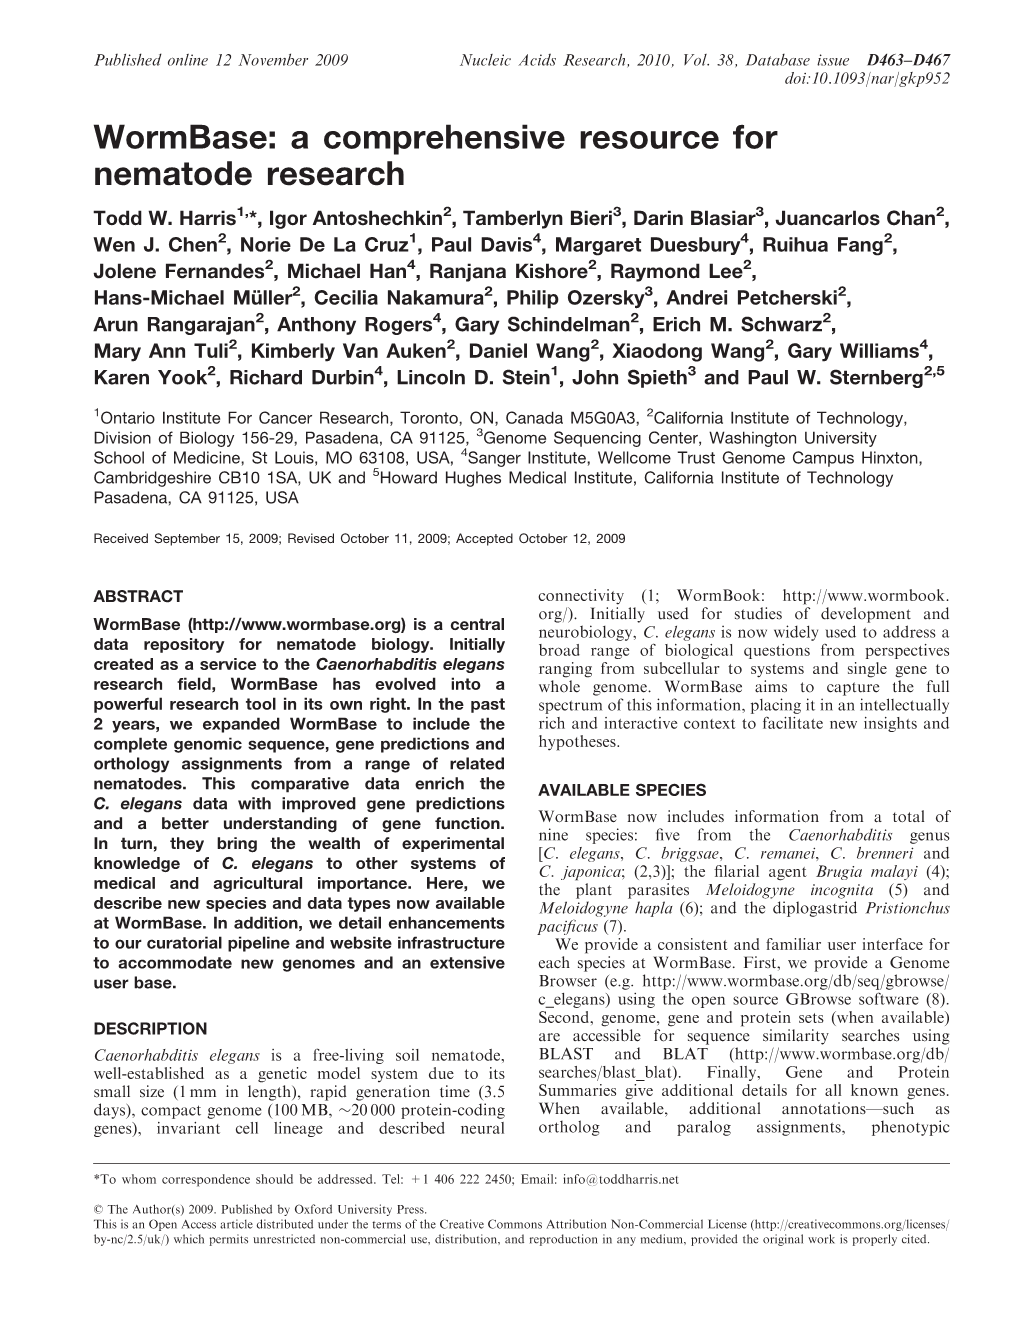 Wormbase: a Comprehensive Resource for Nematode Research Todd W